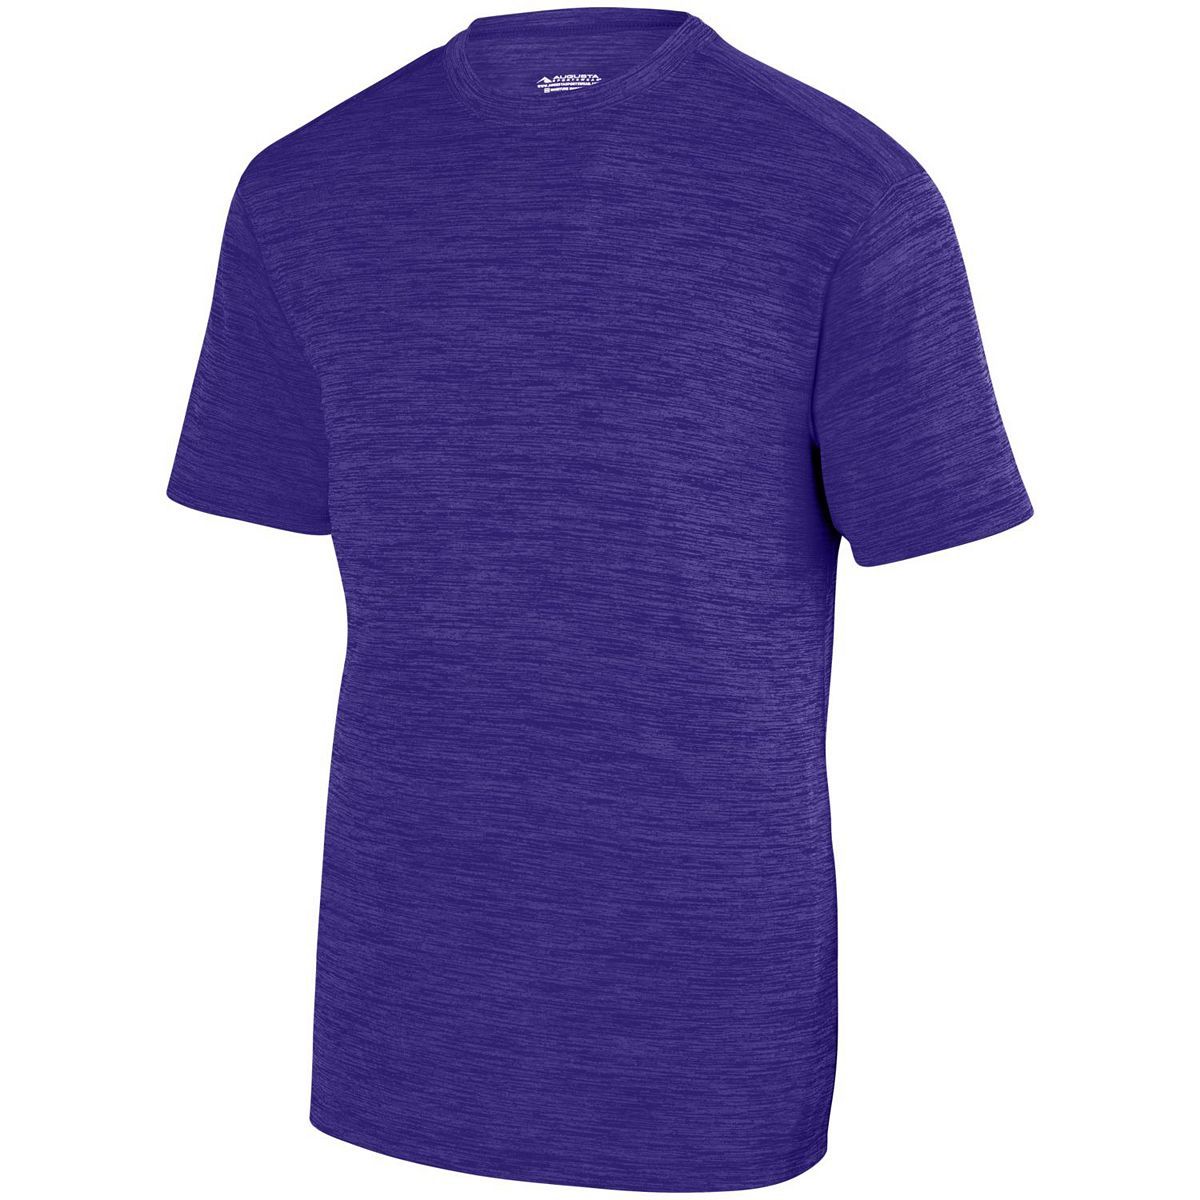 Augusta Sportswear Shadow Tonal Heather Training Tee in Purple  -Part of the Adult, Adult-Tee-Shirt, T-Shirts, Augusta-Products, Shirts, Tonal-Fleece-Collection product lines at KanaleyCreations.com